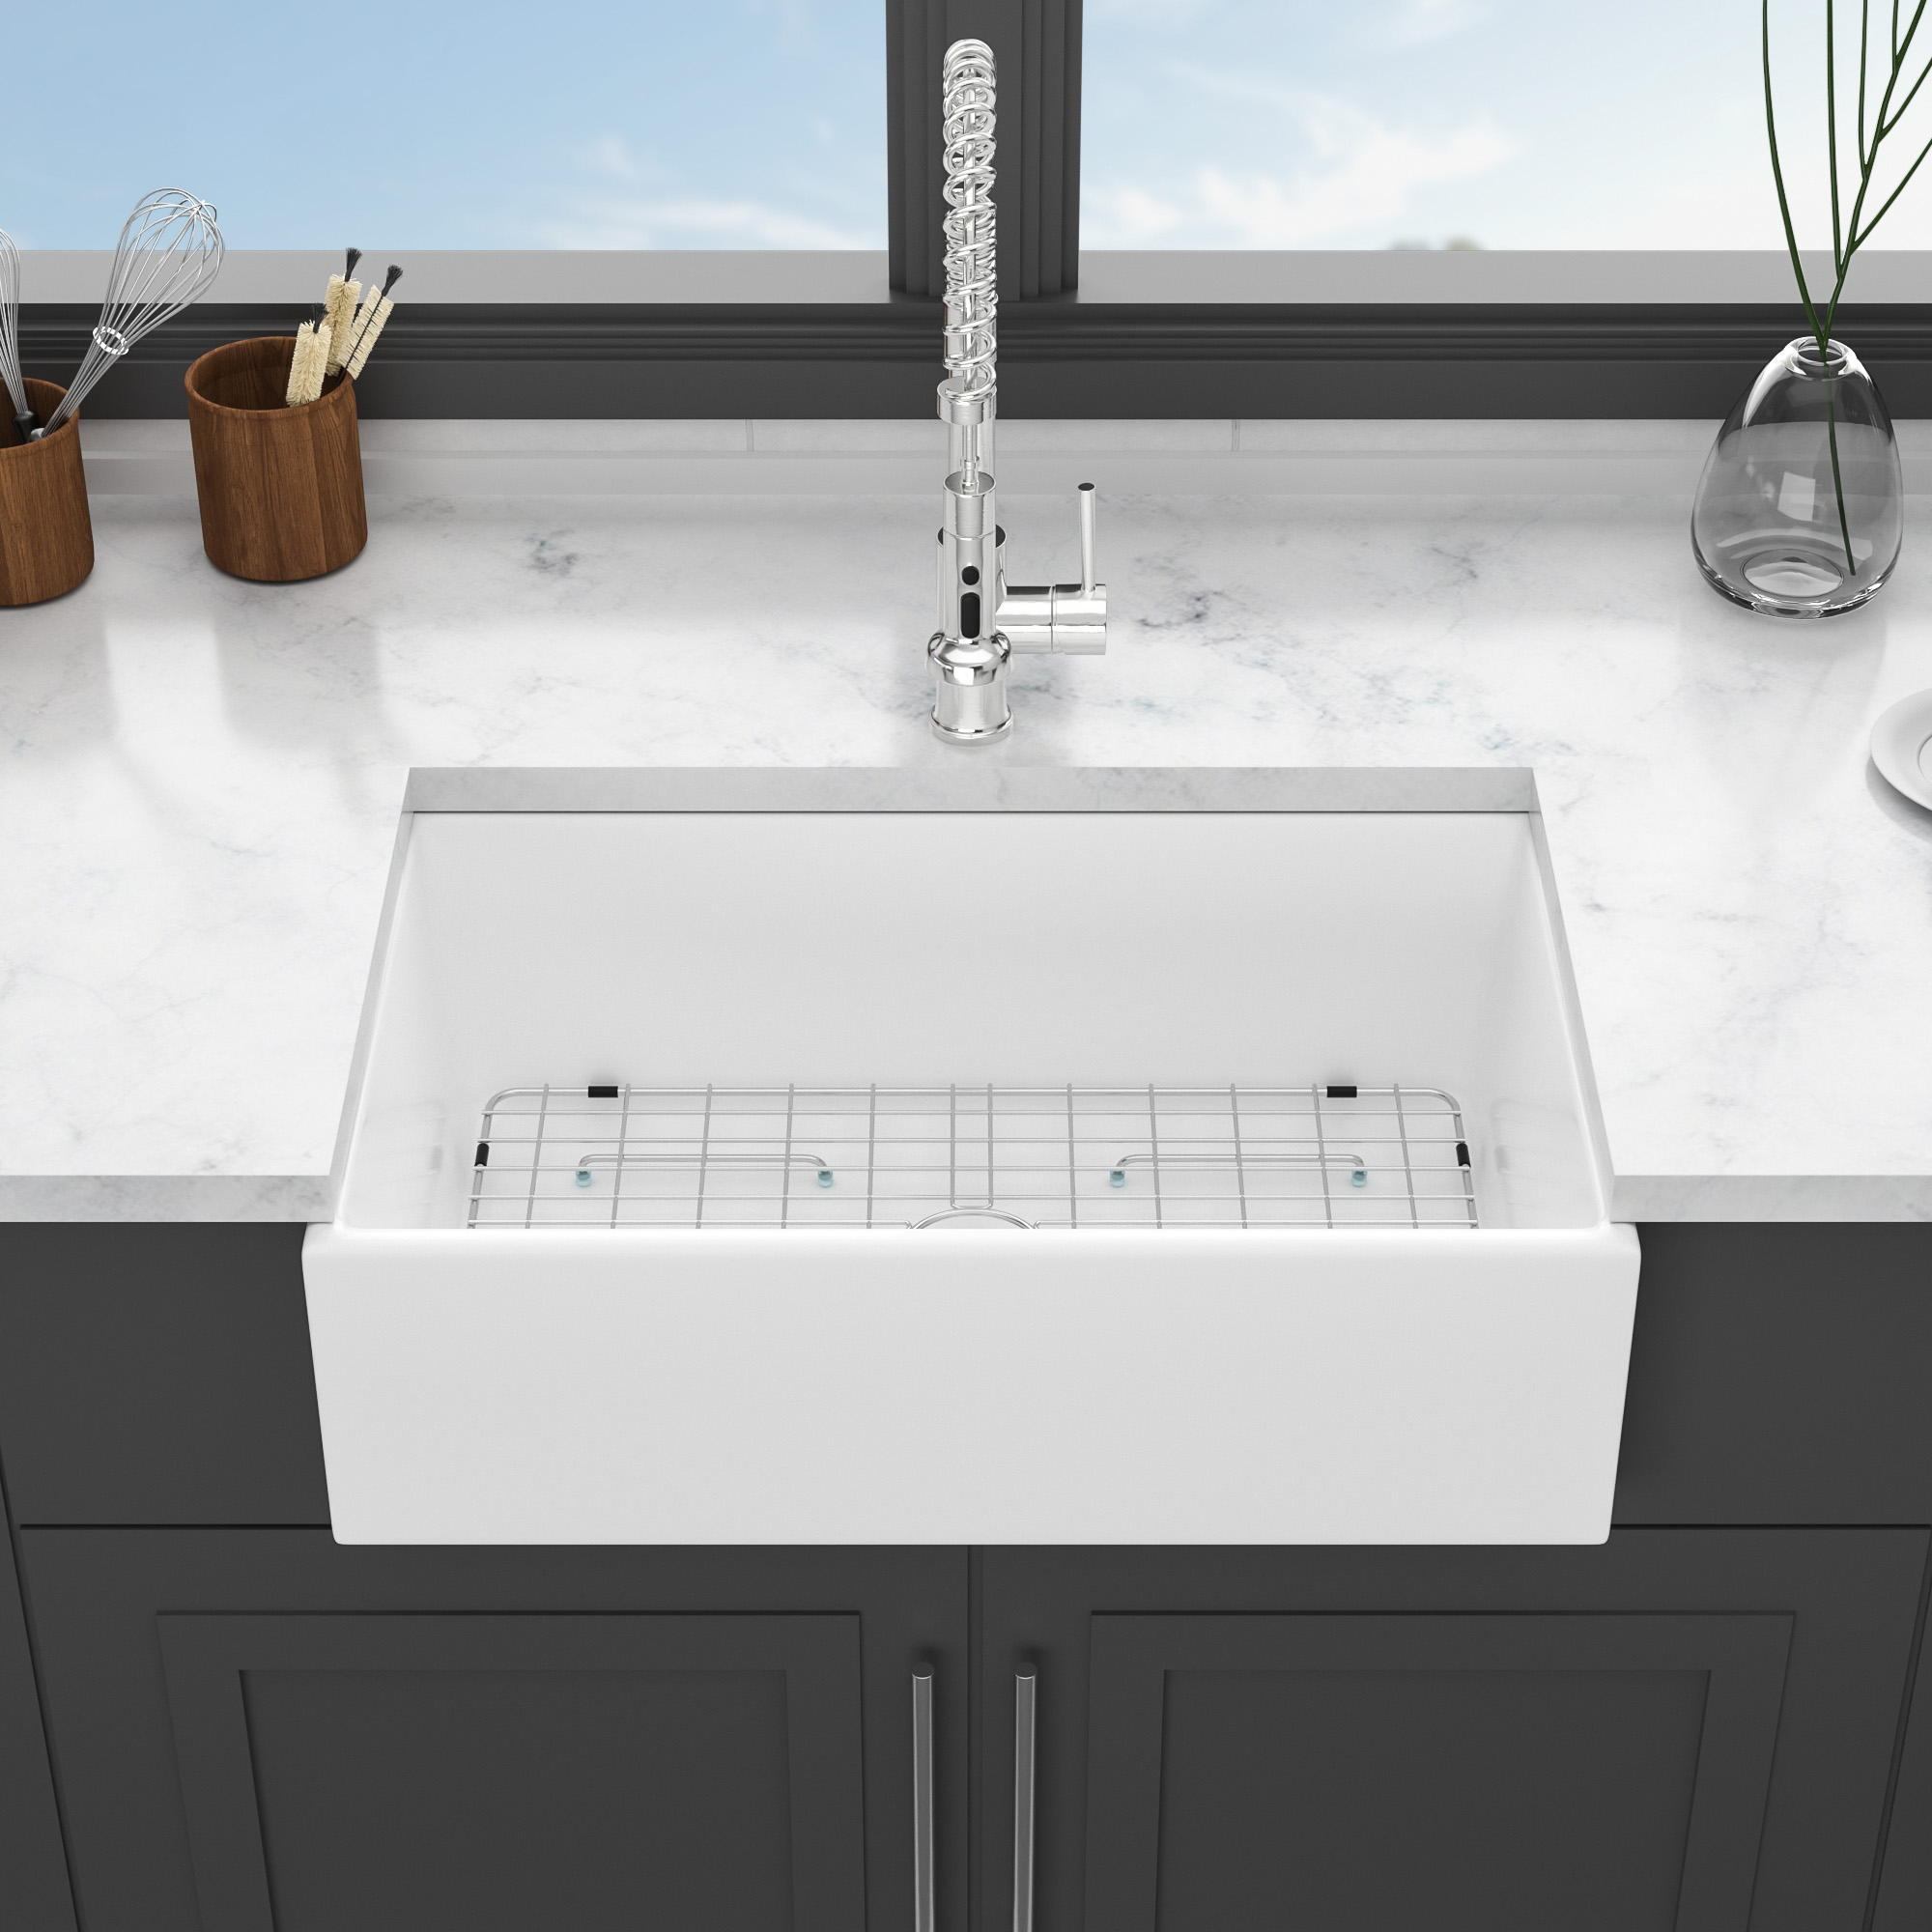 33 White Farmhouse Sink - 33 Inch Kitchen Sink White Undermount Single Bowl Apron Front Ceremic Sink Farm Style Drain Asseblemly and Bottom Grate 33x18x10 Inch